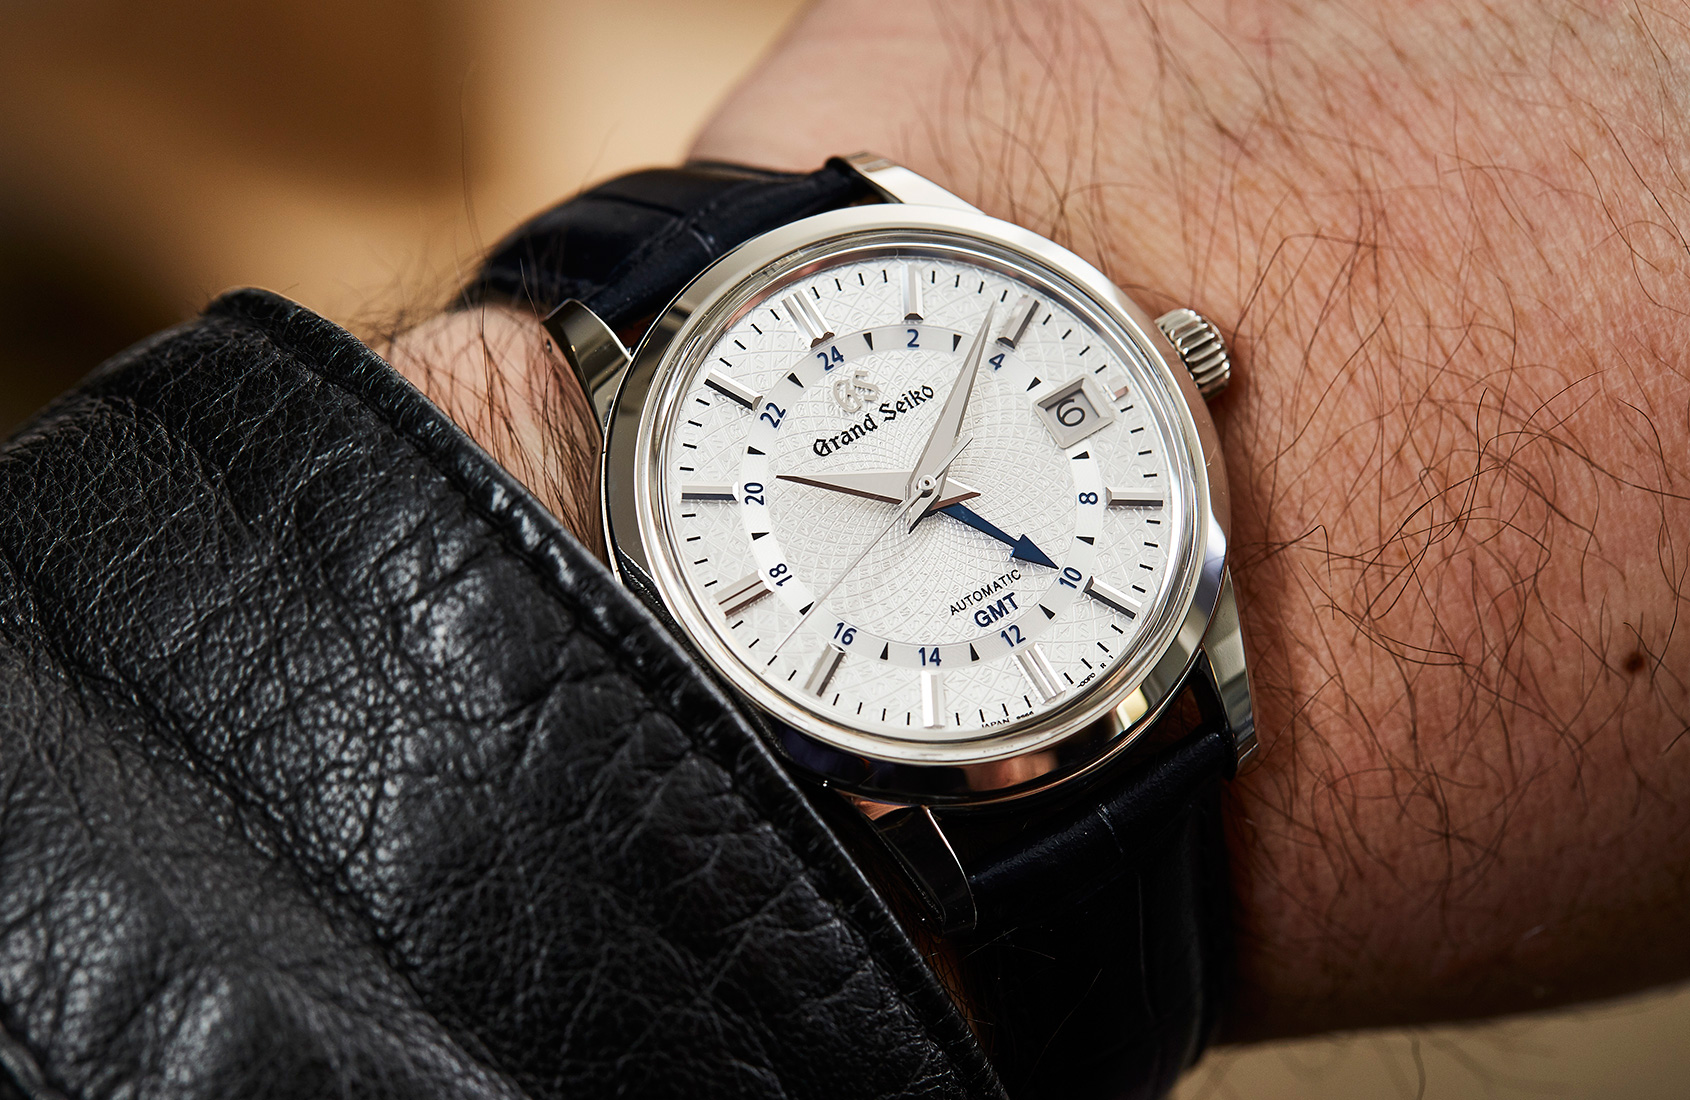 HANDS-ON: Grand Seiko’s dressy GMT – the SBGM235